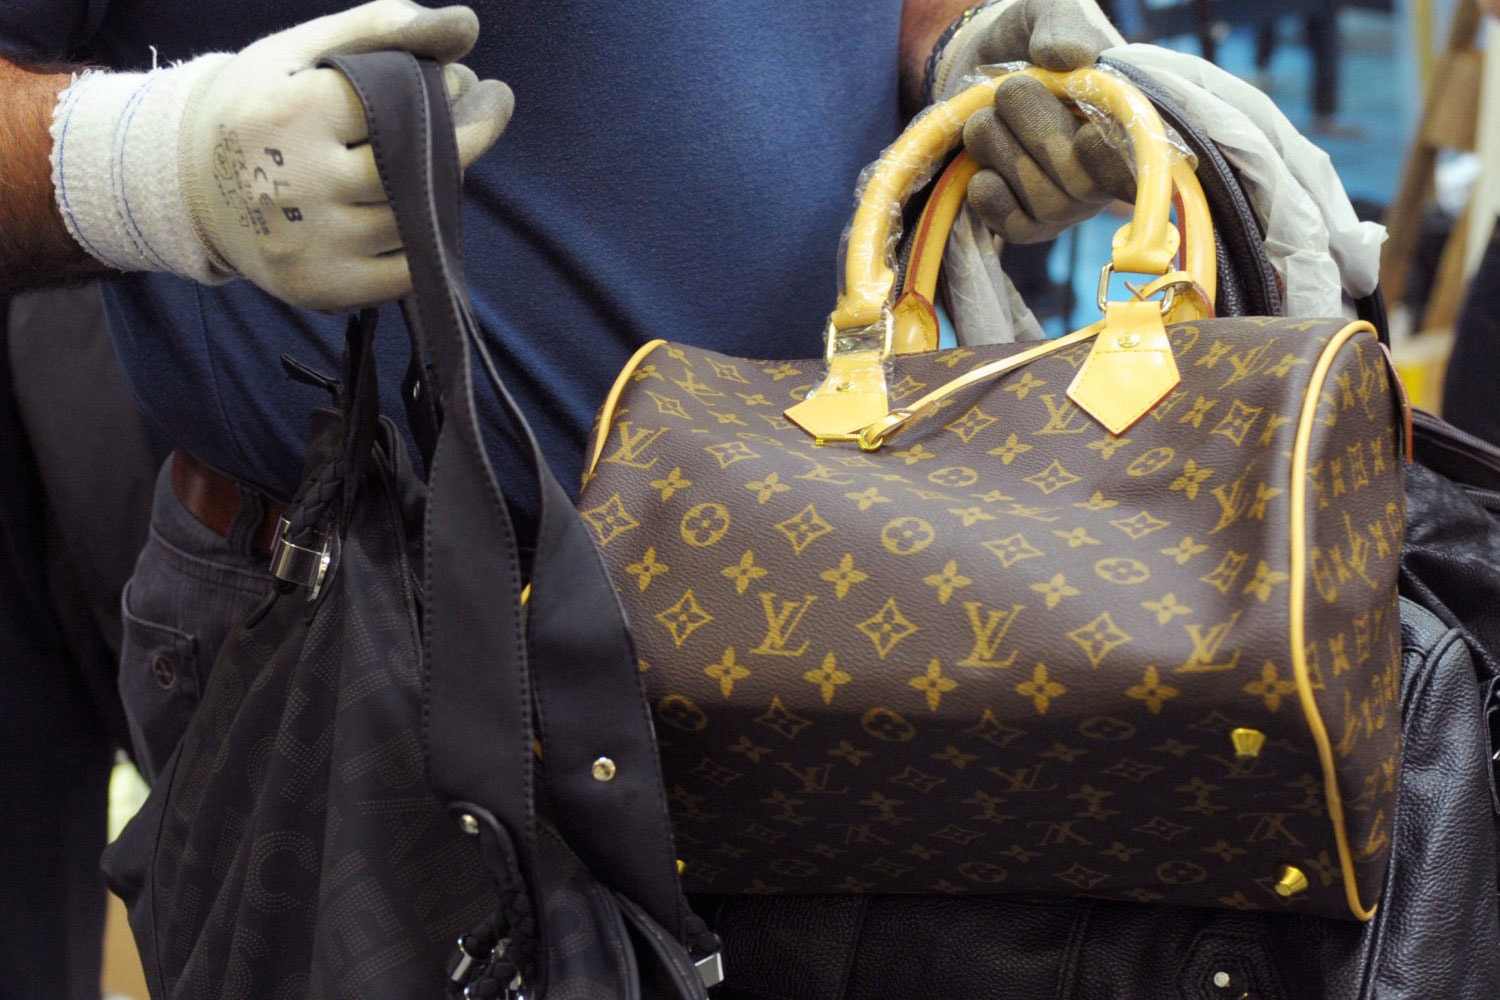 RICH LADIES WHO BUY FAKE HANDBAGS! The truth about luxury replica